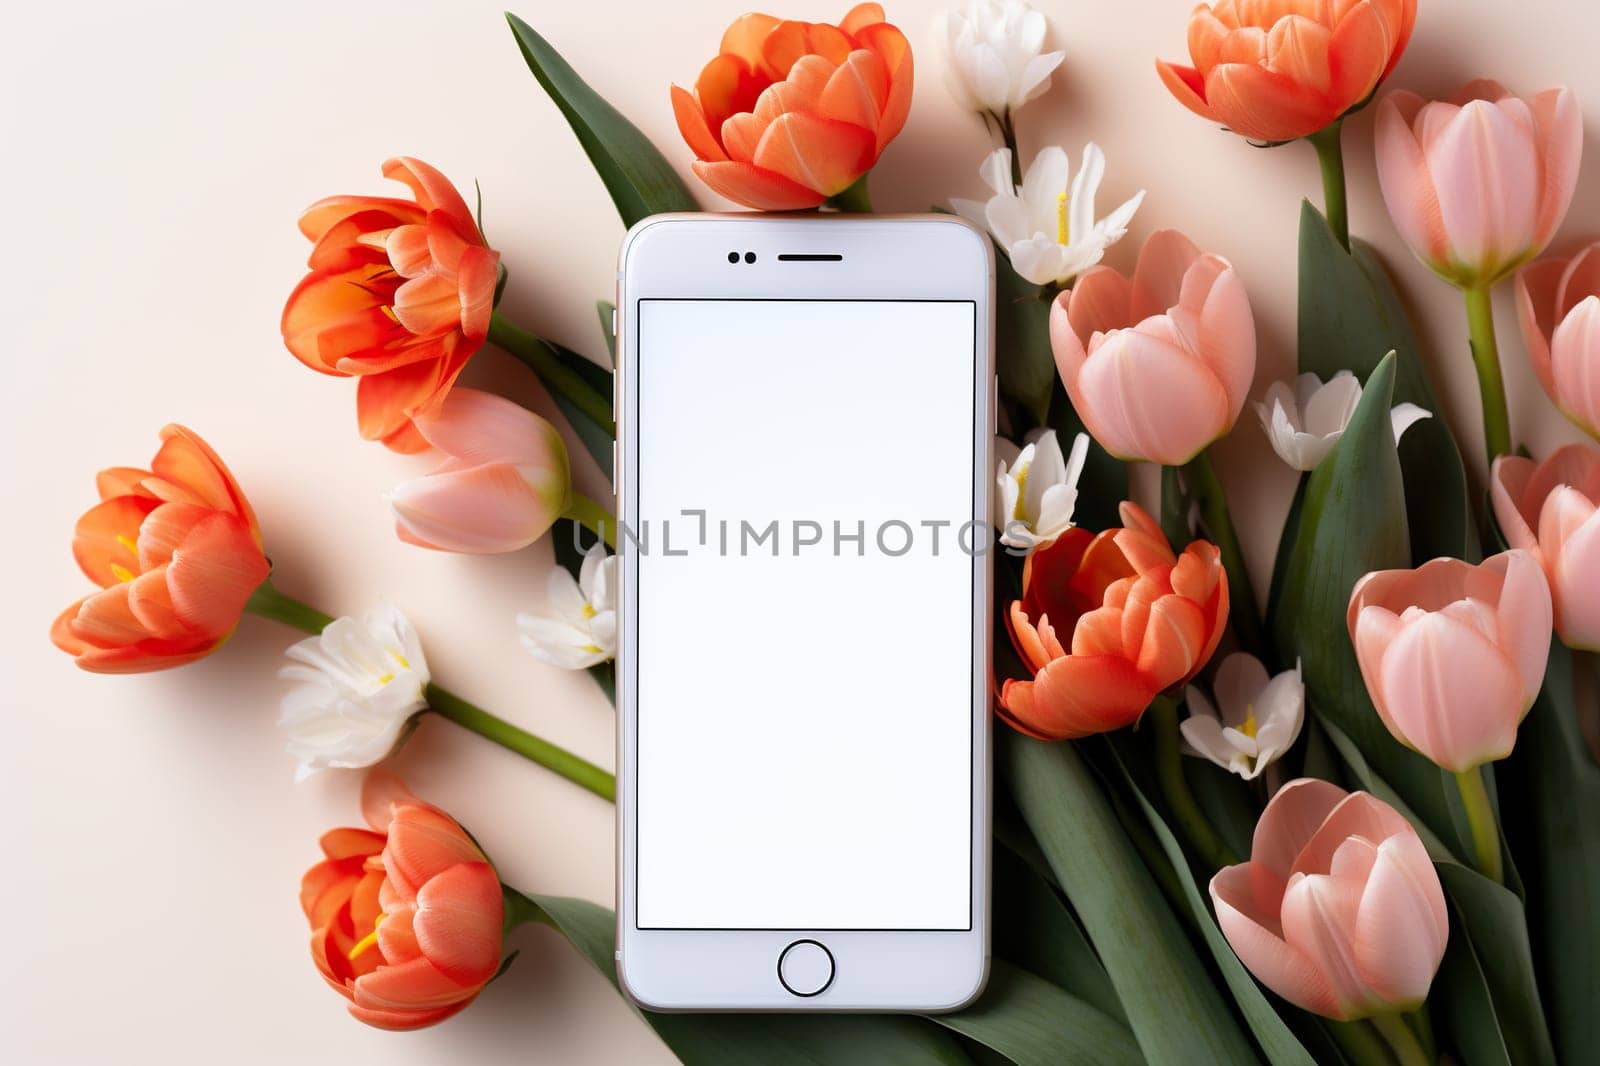 Smartphone mockup with w tulips. Smartphone screen mockup on white background for presentation or app design.